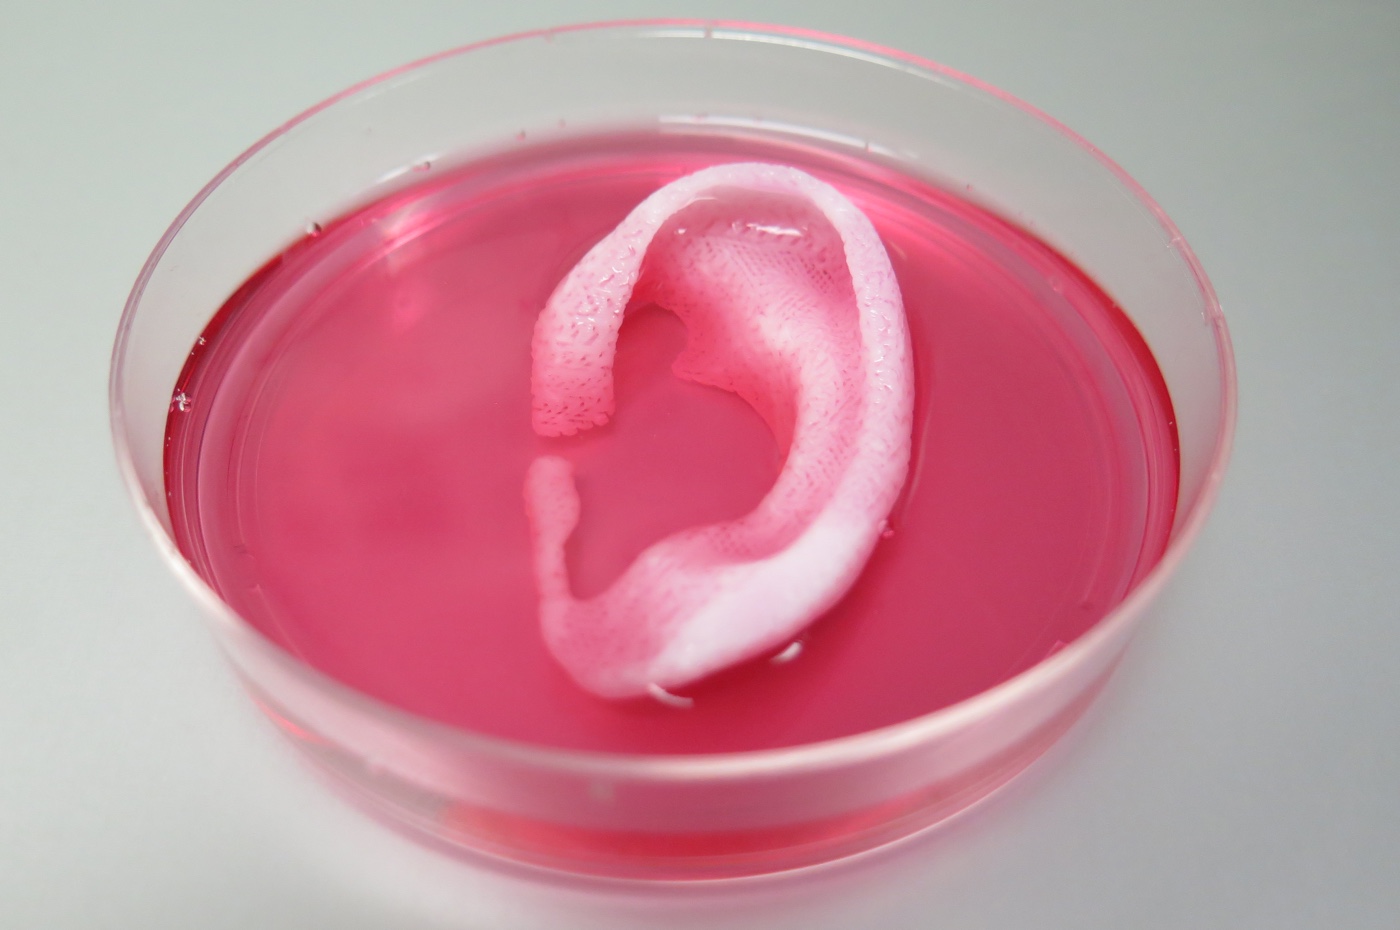 Doctors reveal they can 3D print body parts and tissue